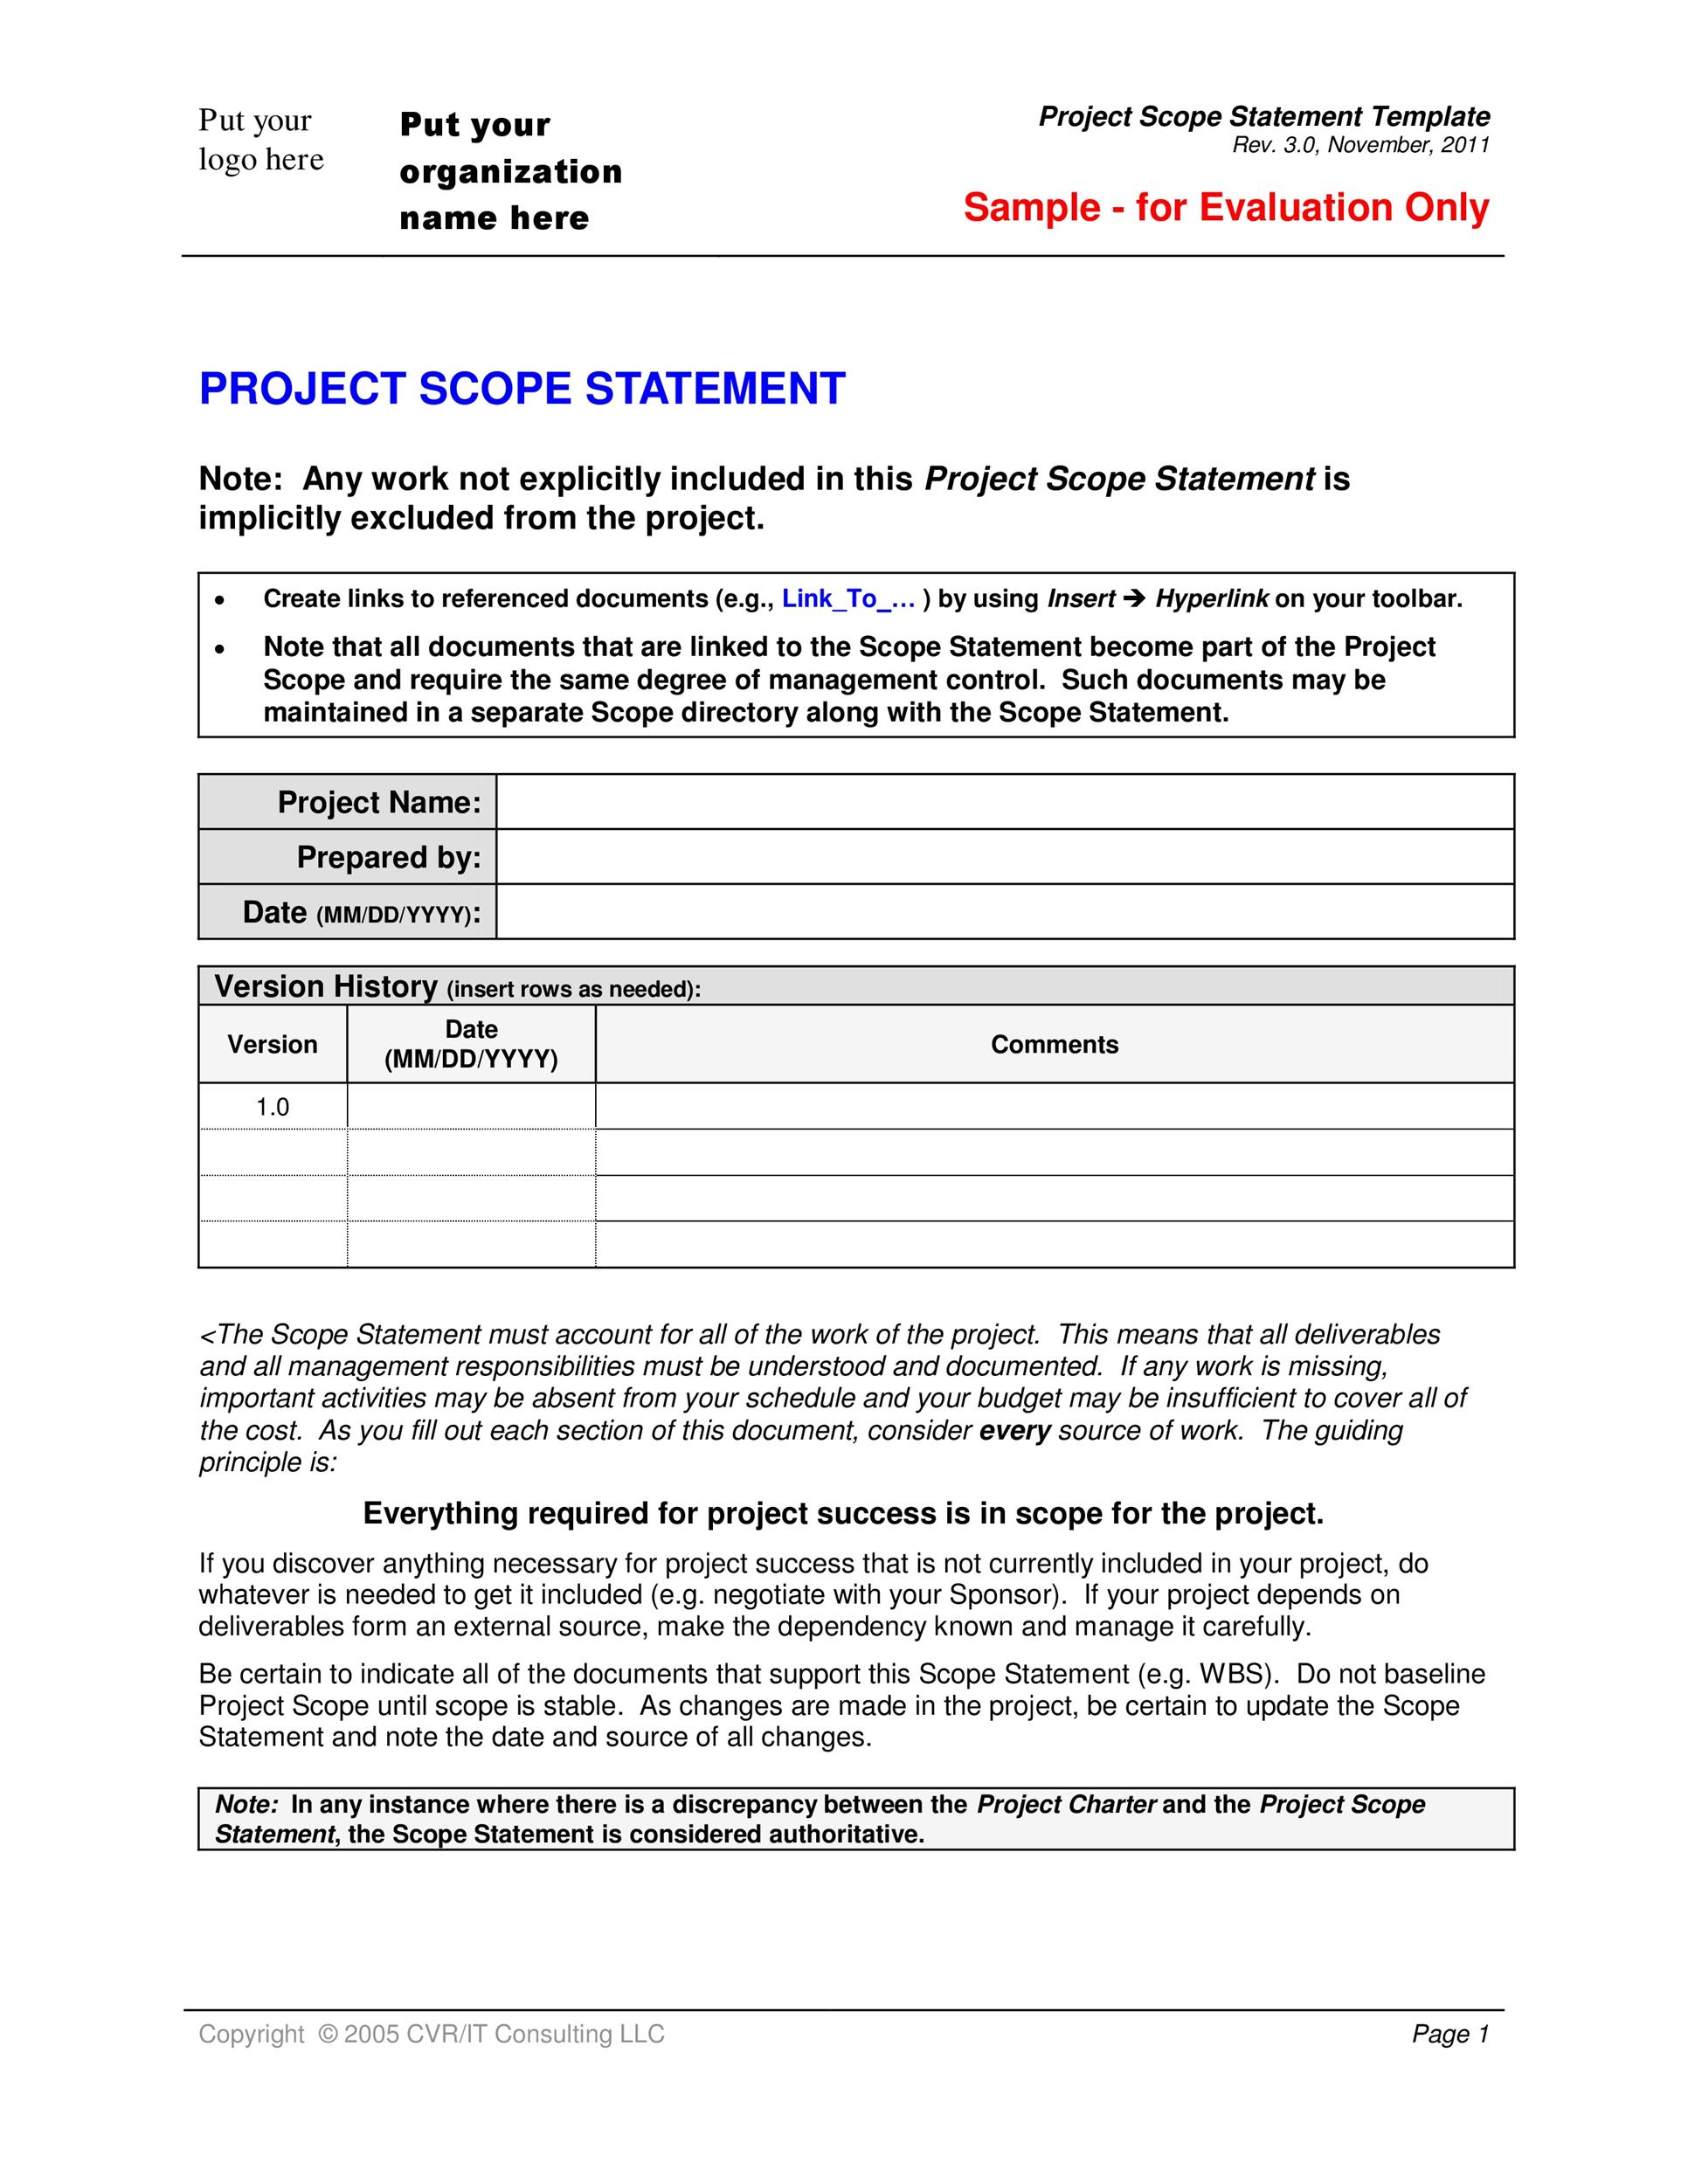 Exclusions on project scope statement